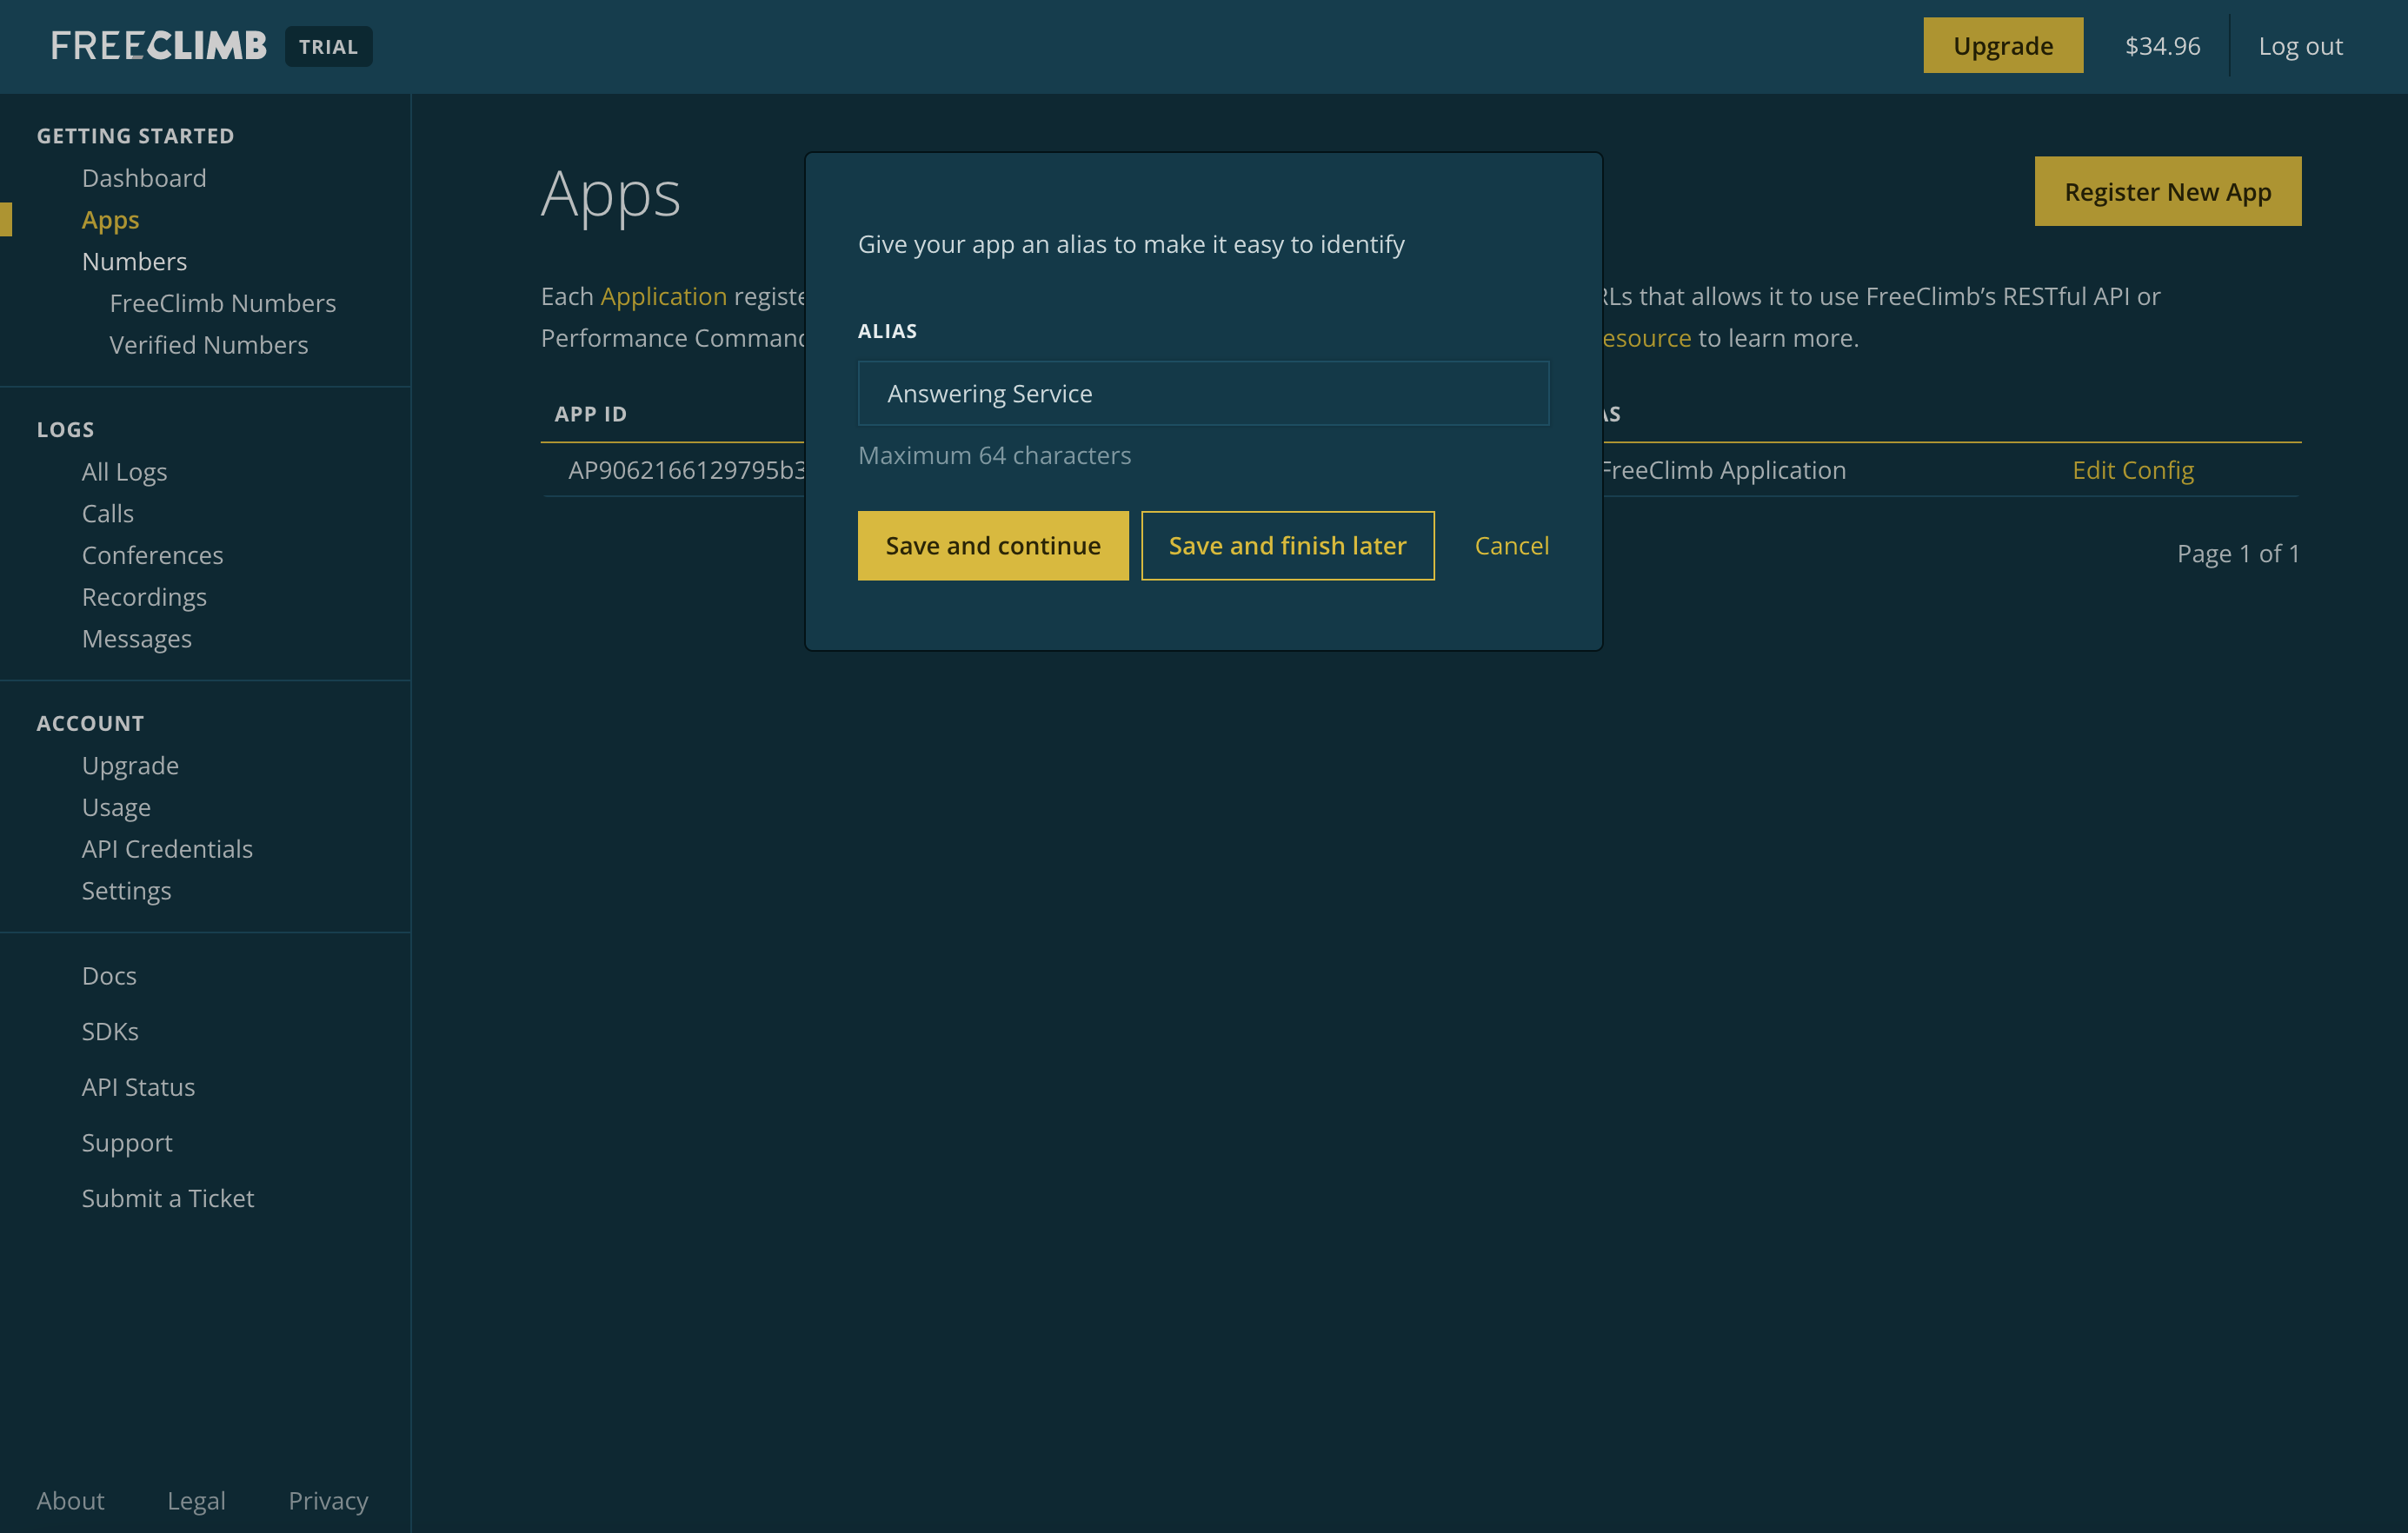 Give your app an alias in the "Register New App" modal